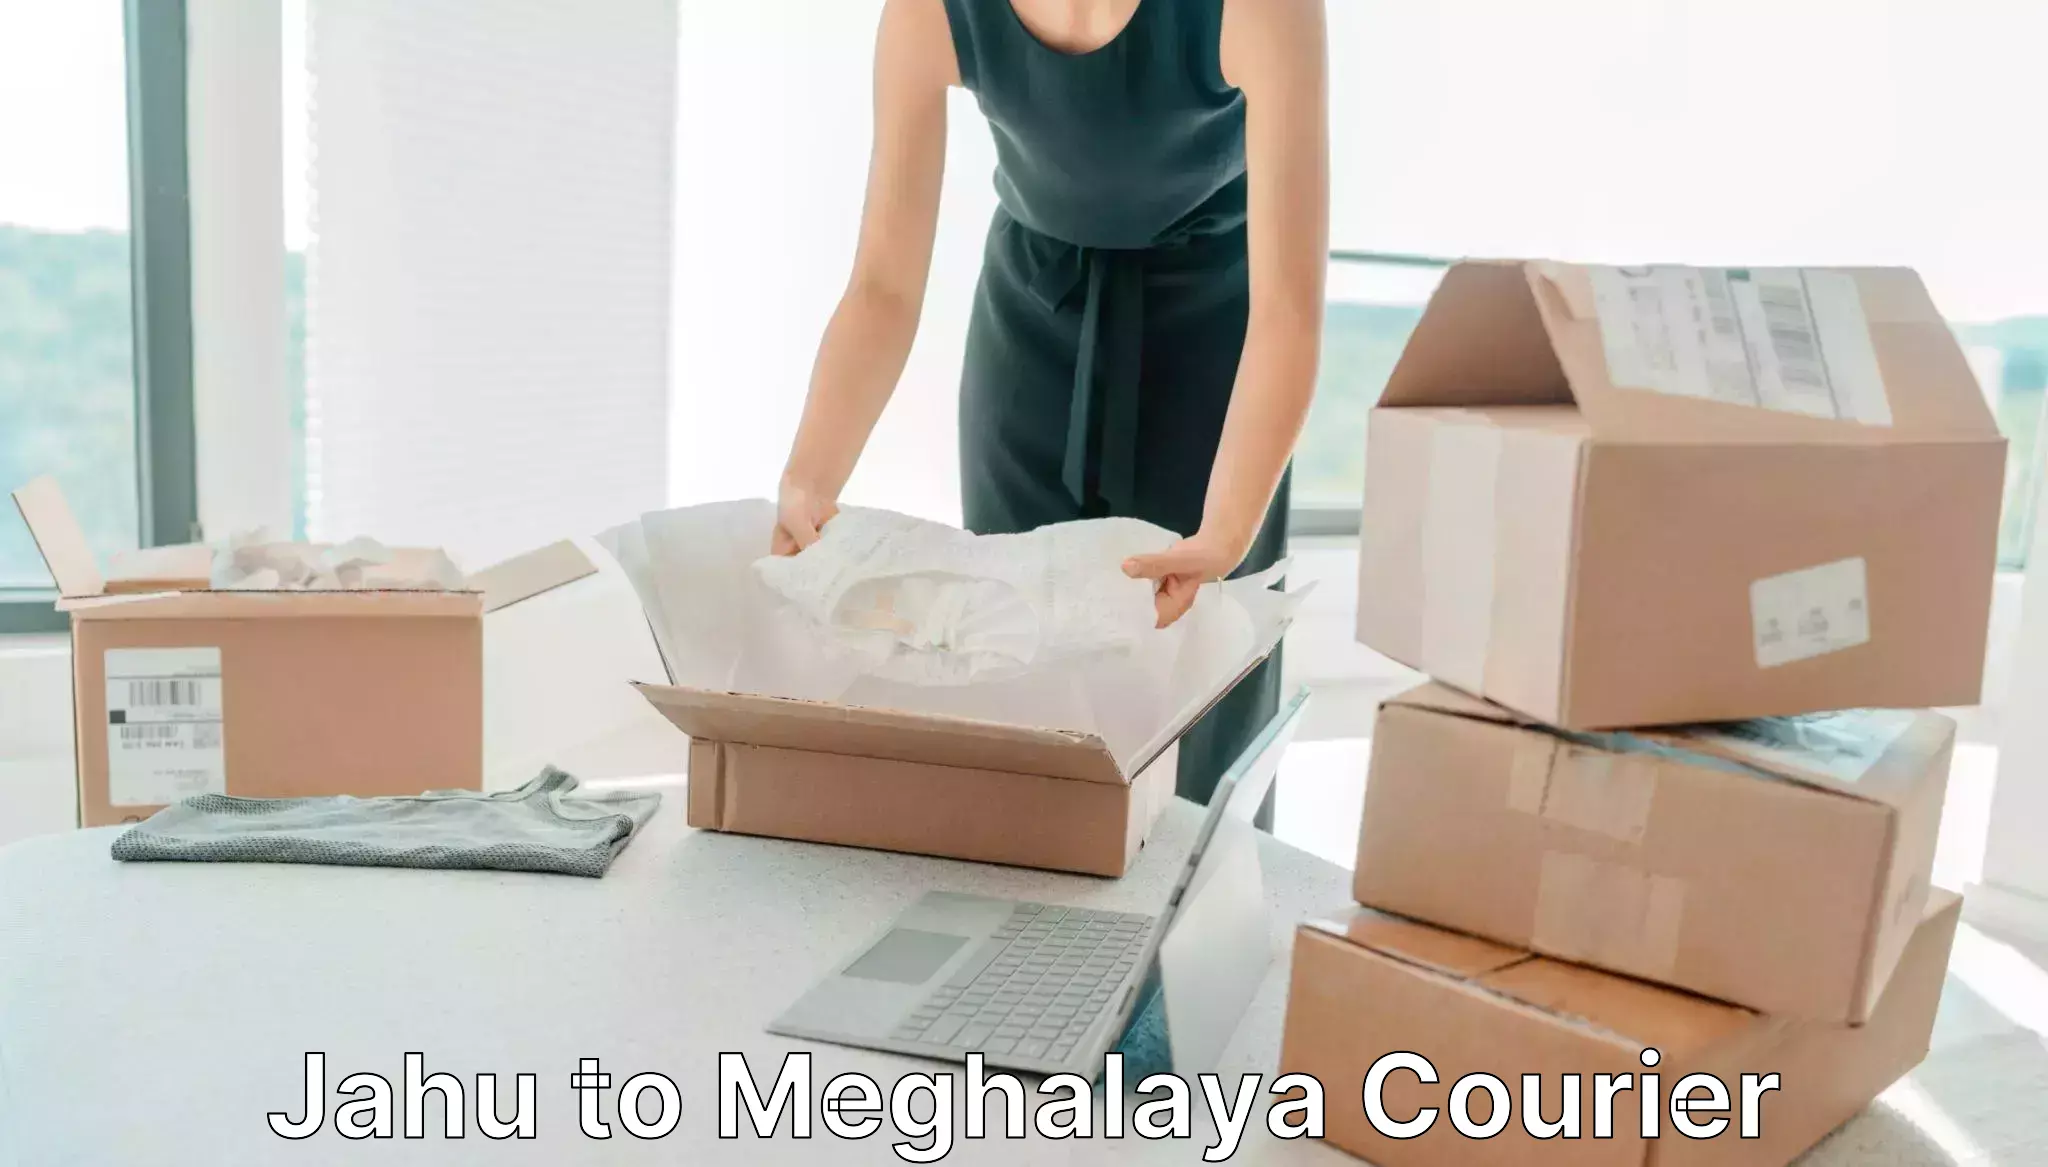 Residential courier service Jahu to South Garo Hills